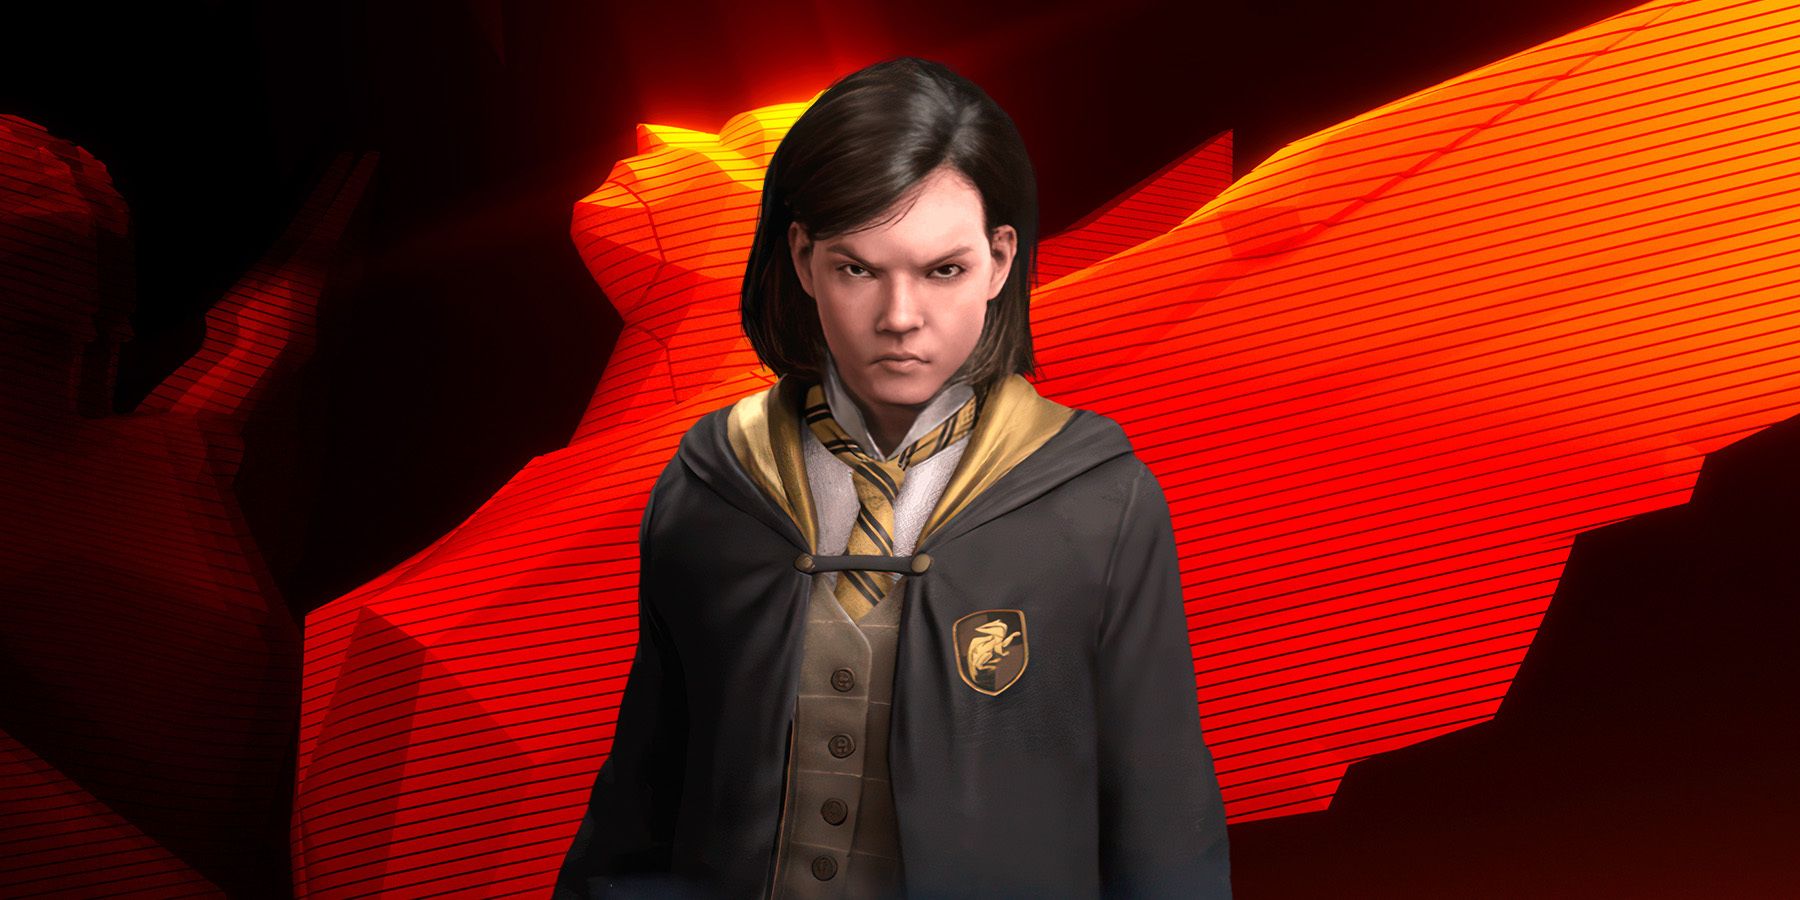 Did Hogwarts Legacy Win Game Of The Year?